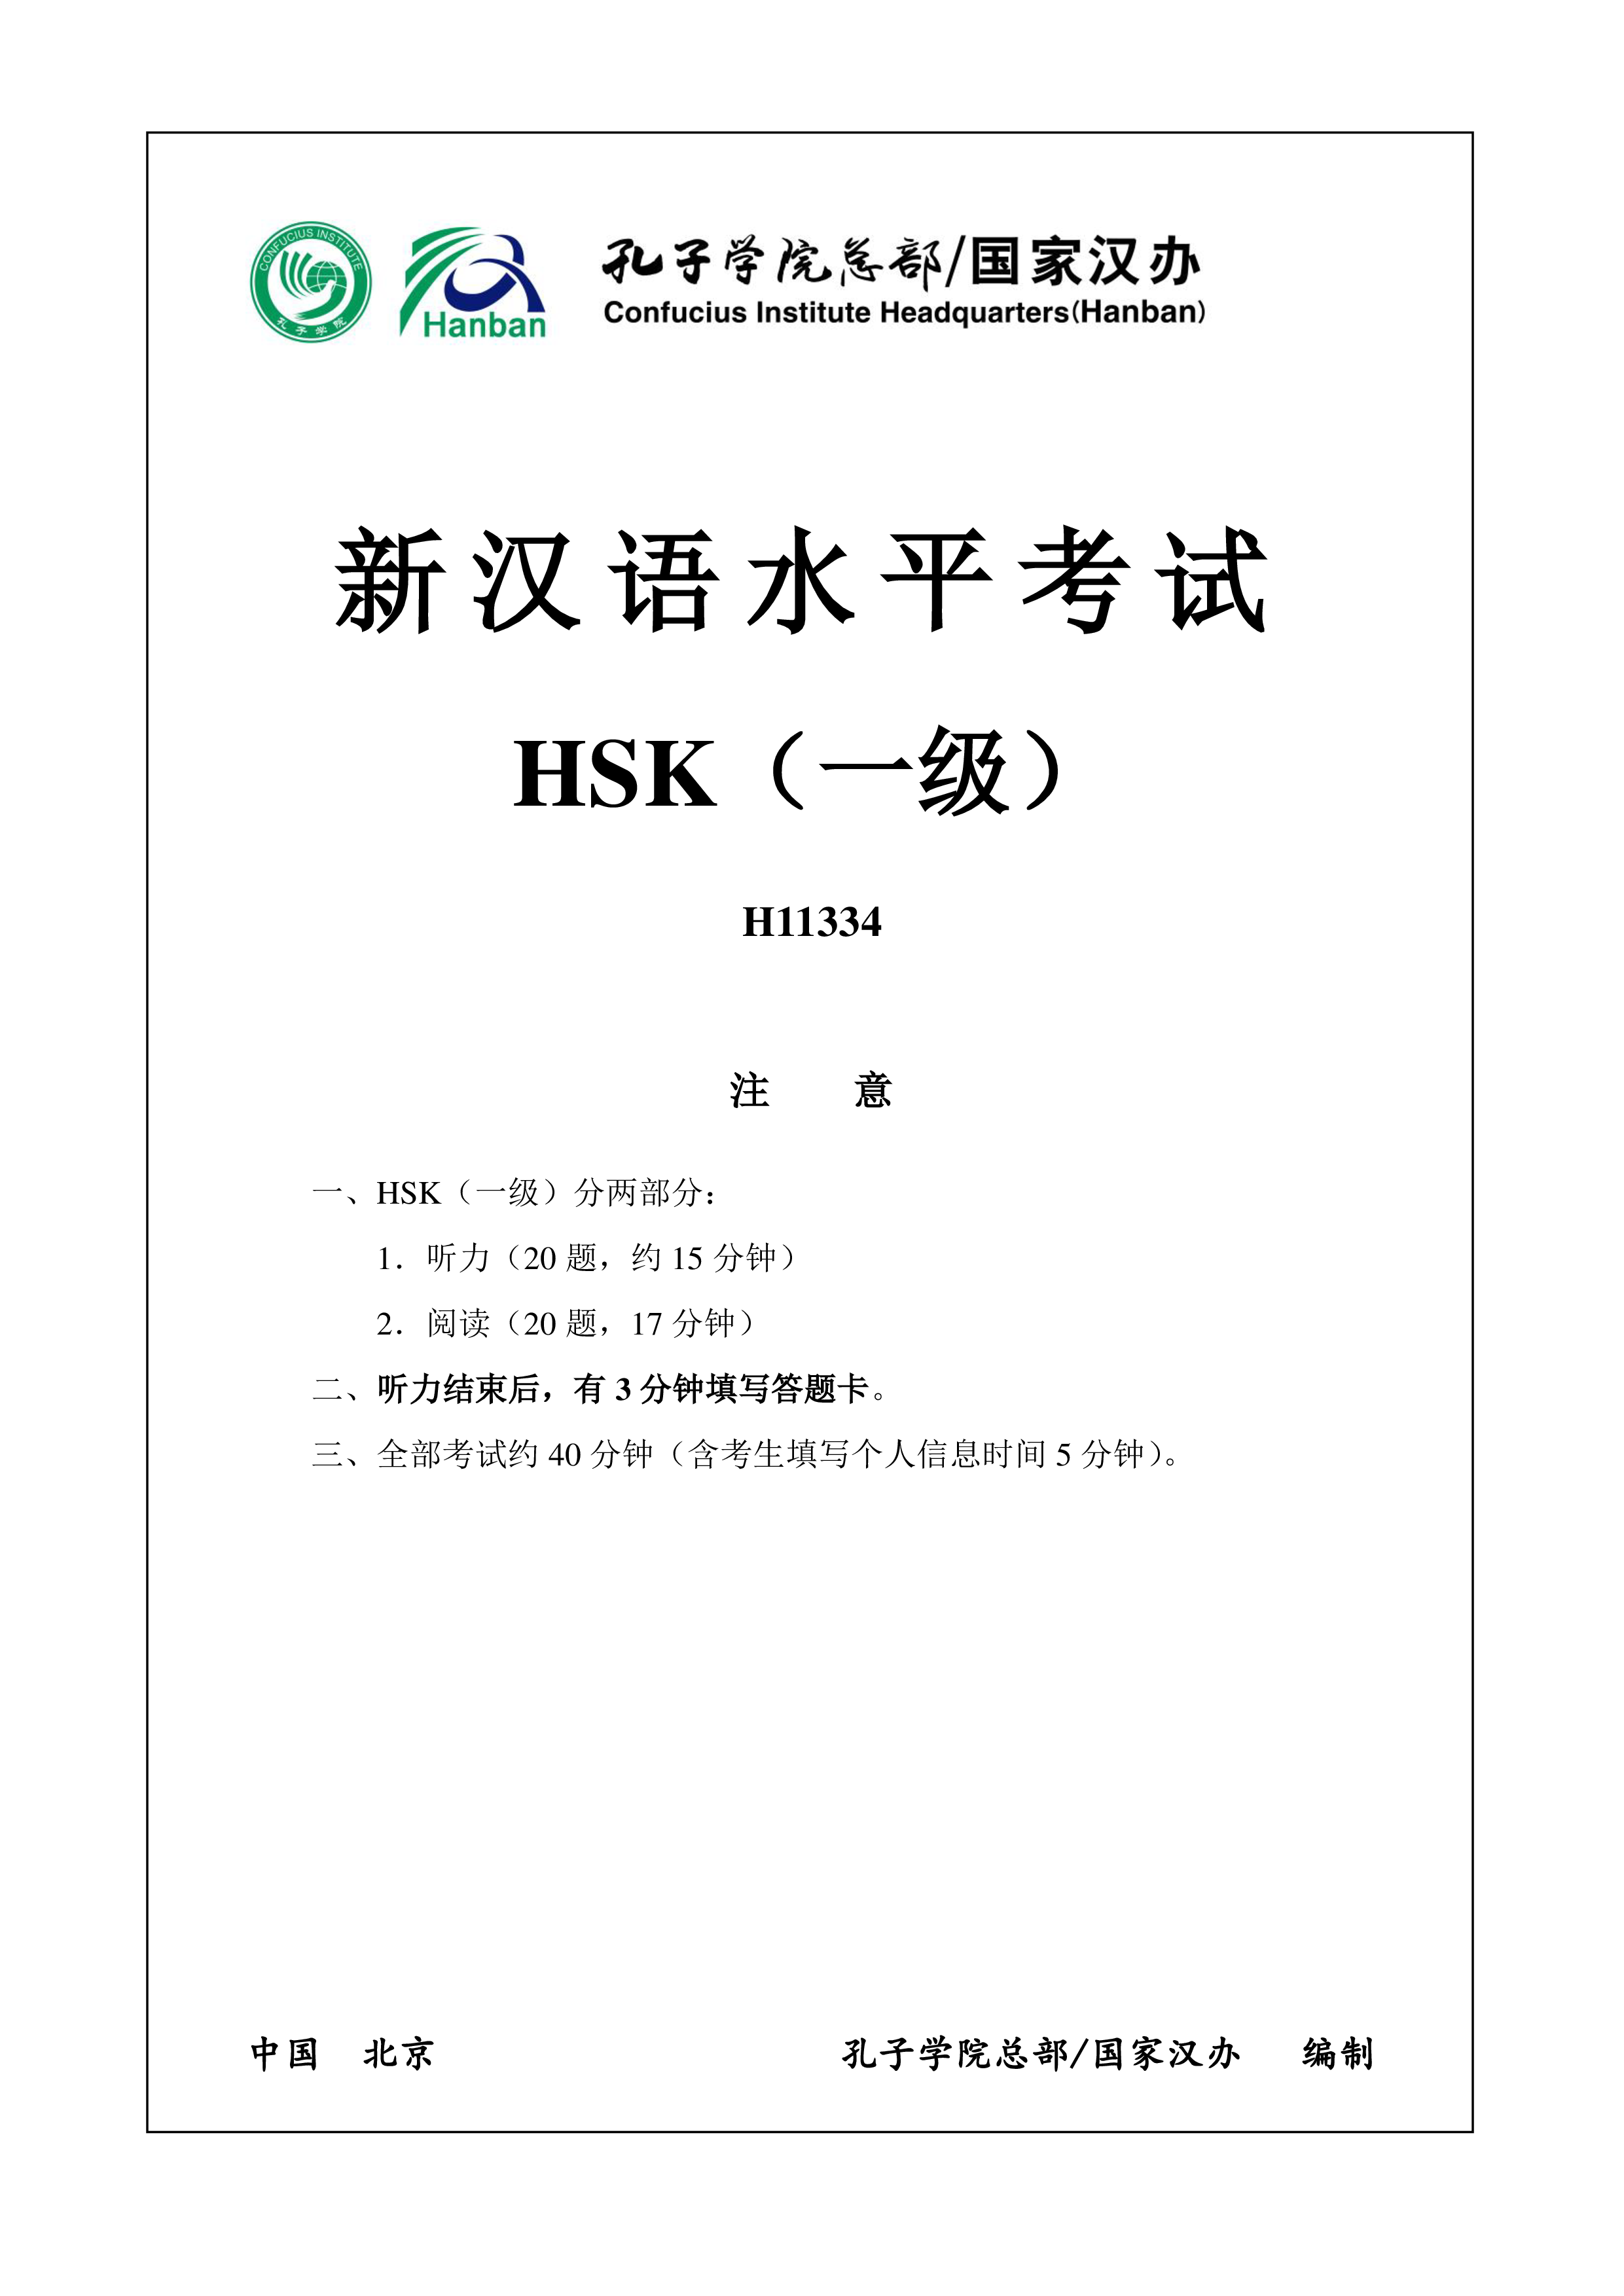 hsk1 chinese exam including answers # hsk1 h11334 voorbeeld afbeelding 